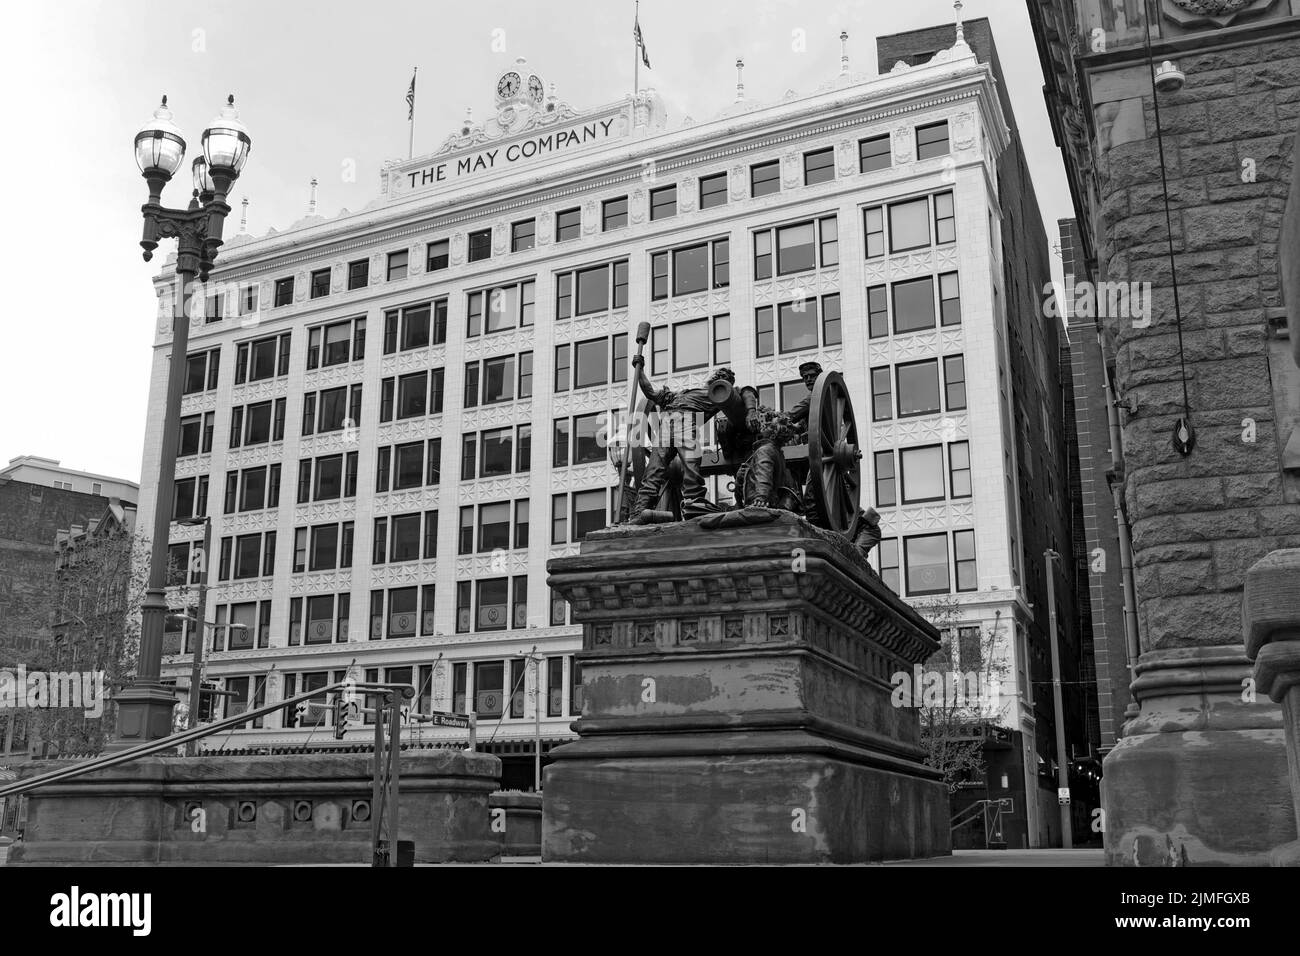 The May Company Building on Public Square in Cleveland Ohio across from the Soldiers and Sailors Monument in black and white. Stock Photo